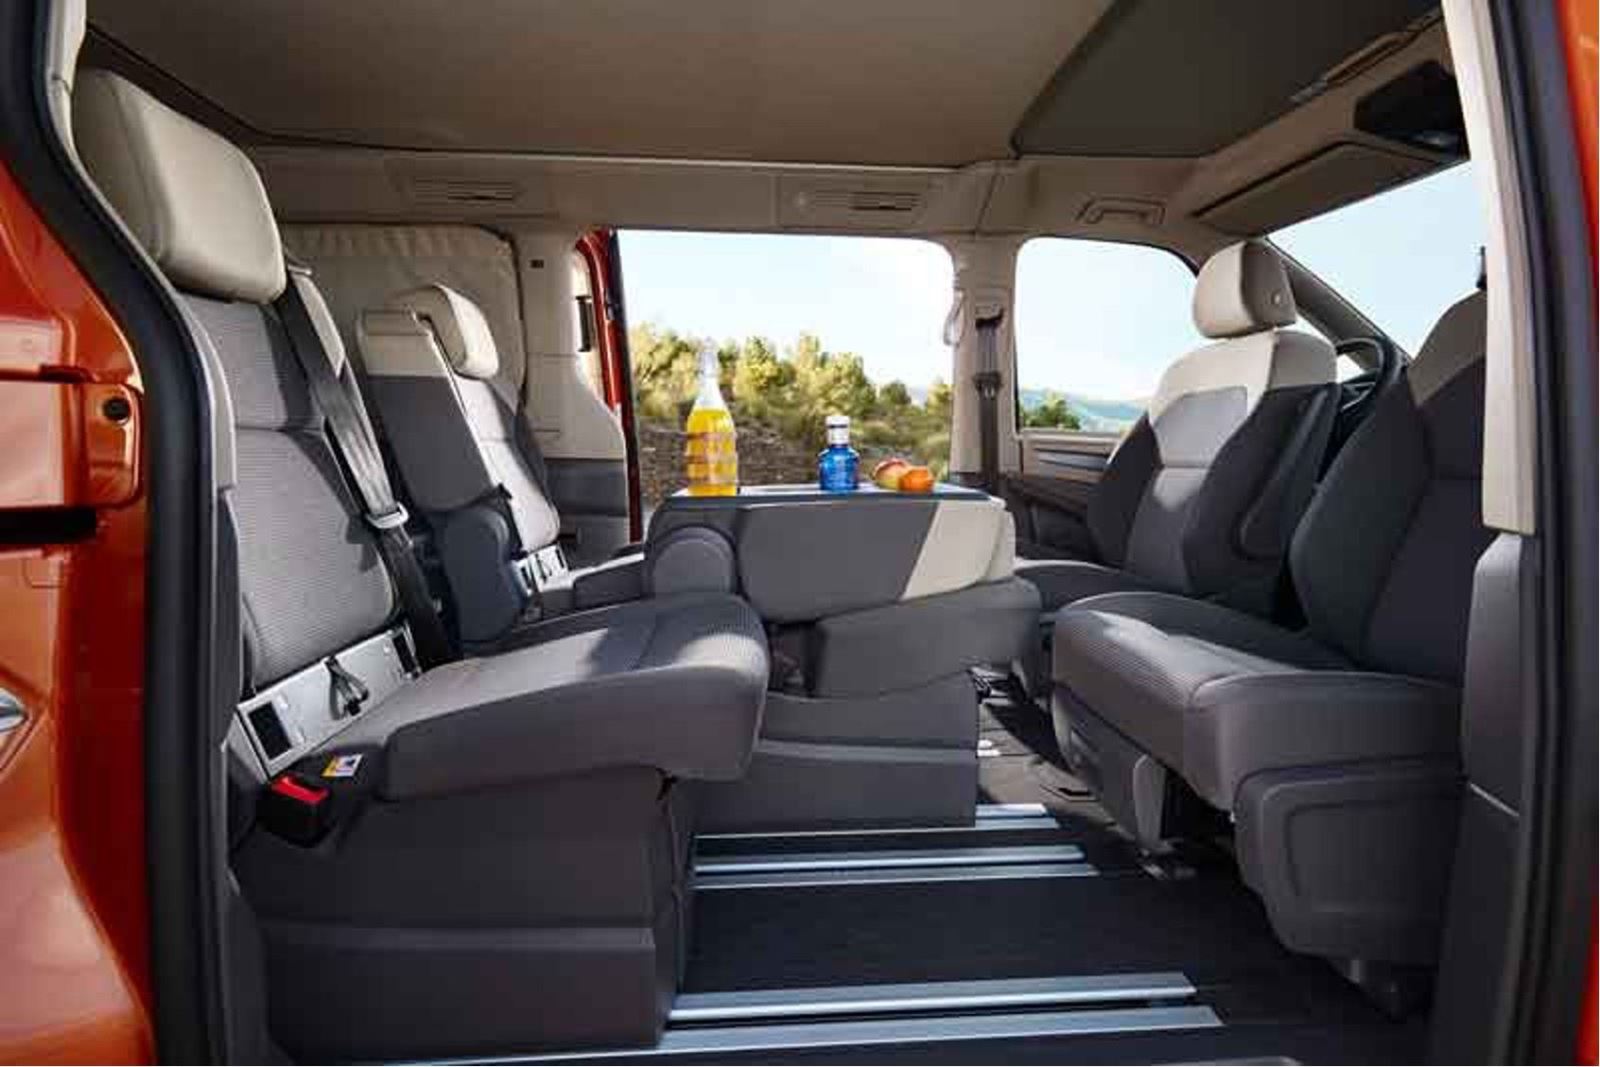 The new models are equipped with removable individual seats in the rear